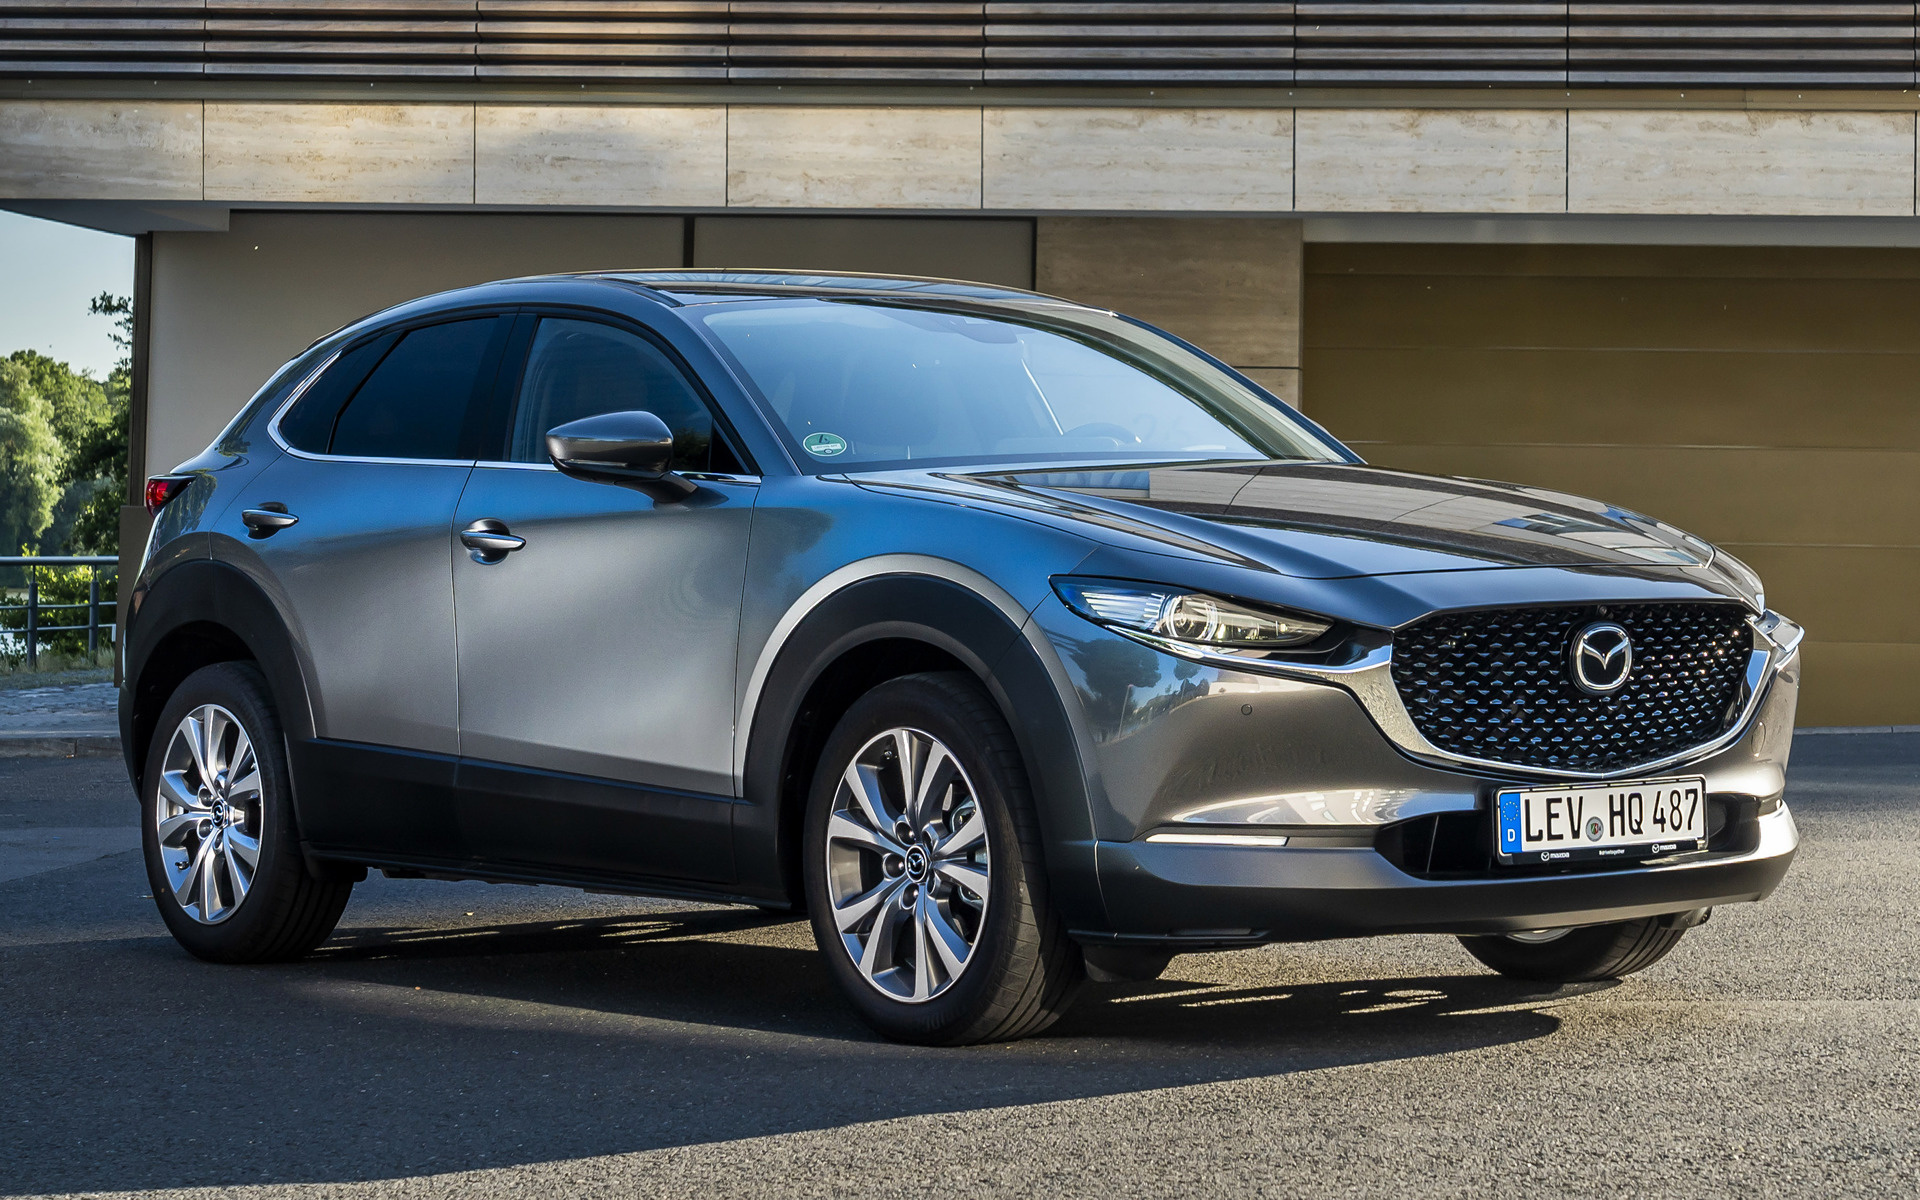 2019 Mazda Cx 30 Wallpapers And Hd Images Car Pixel Images, Photos, Reviews